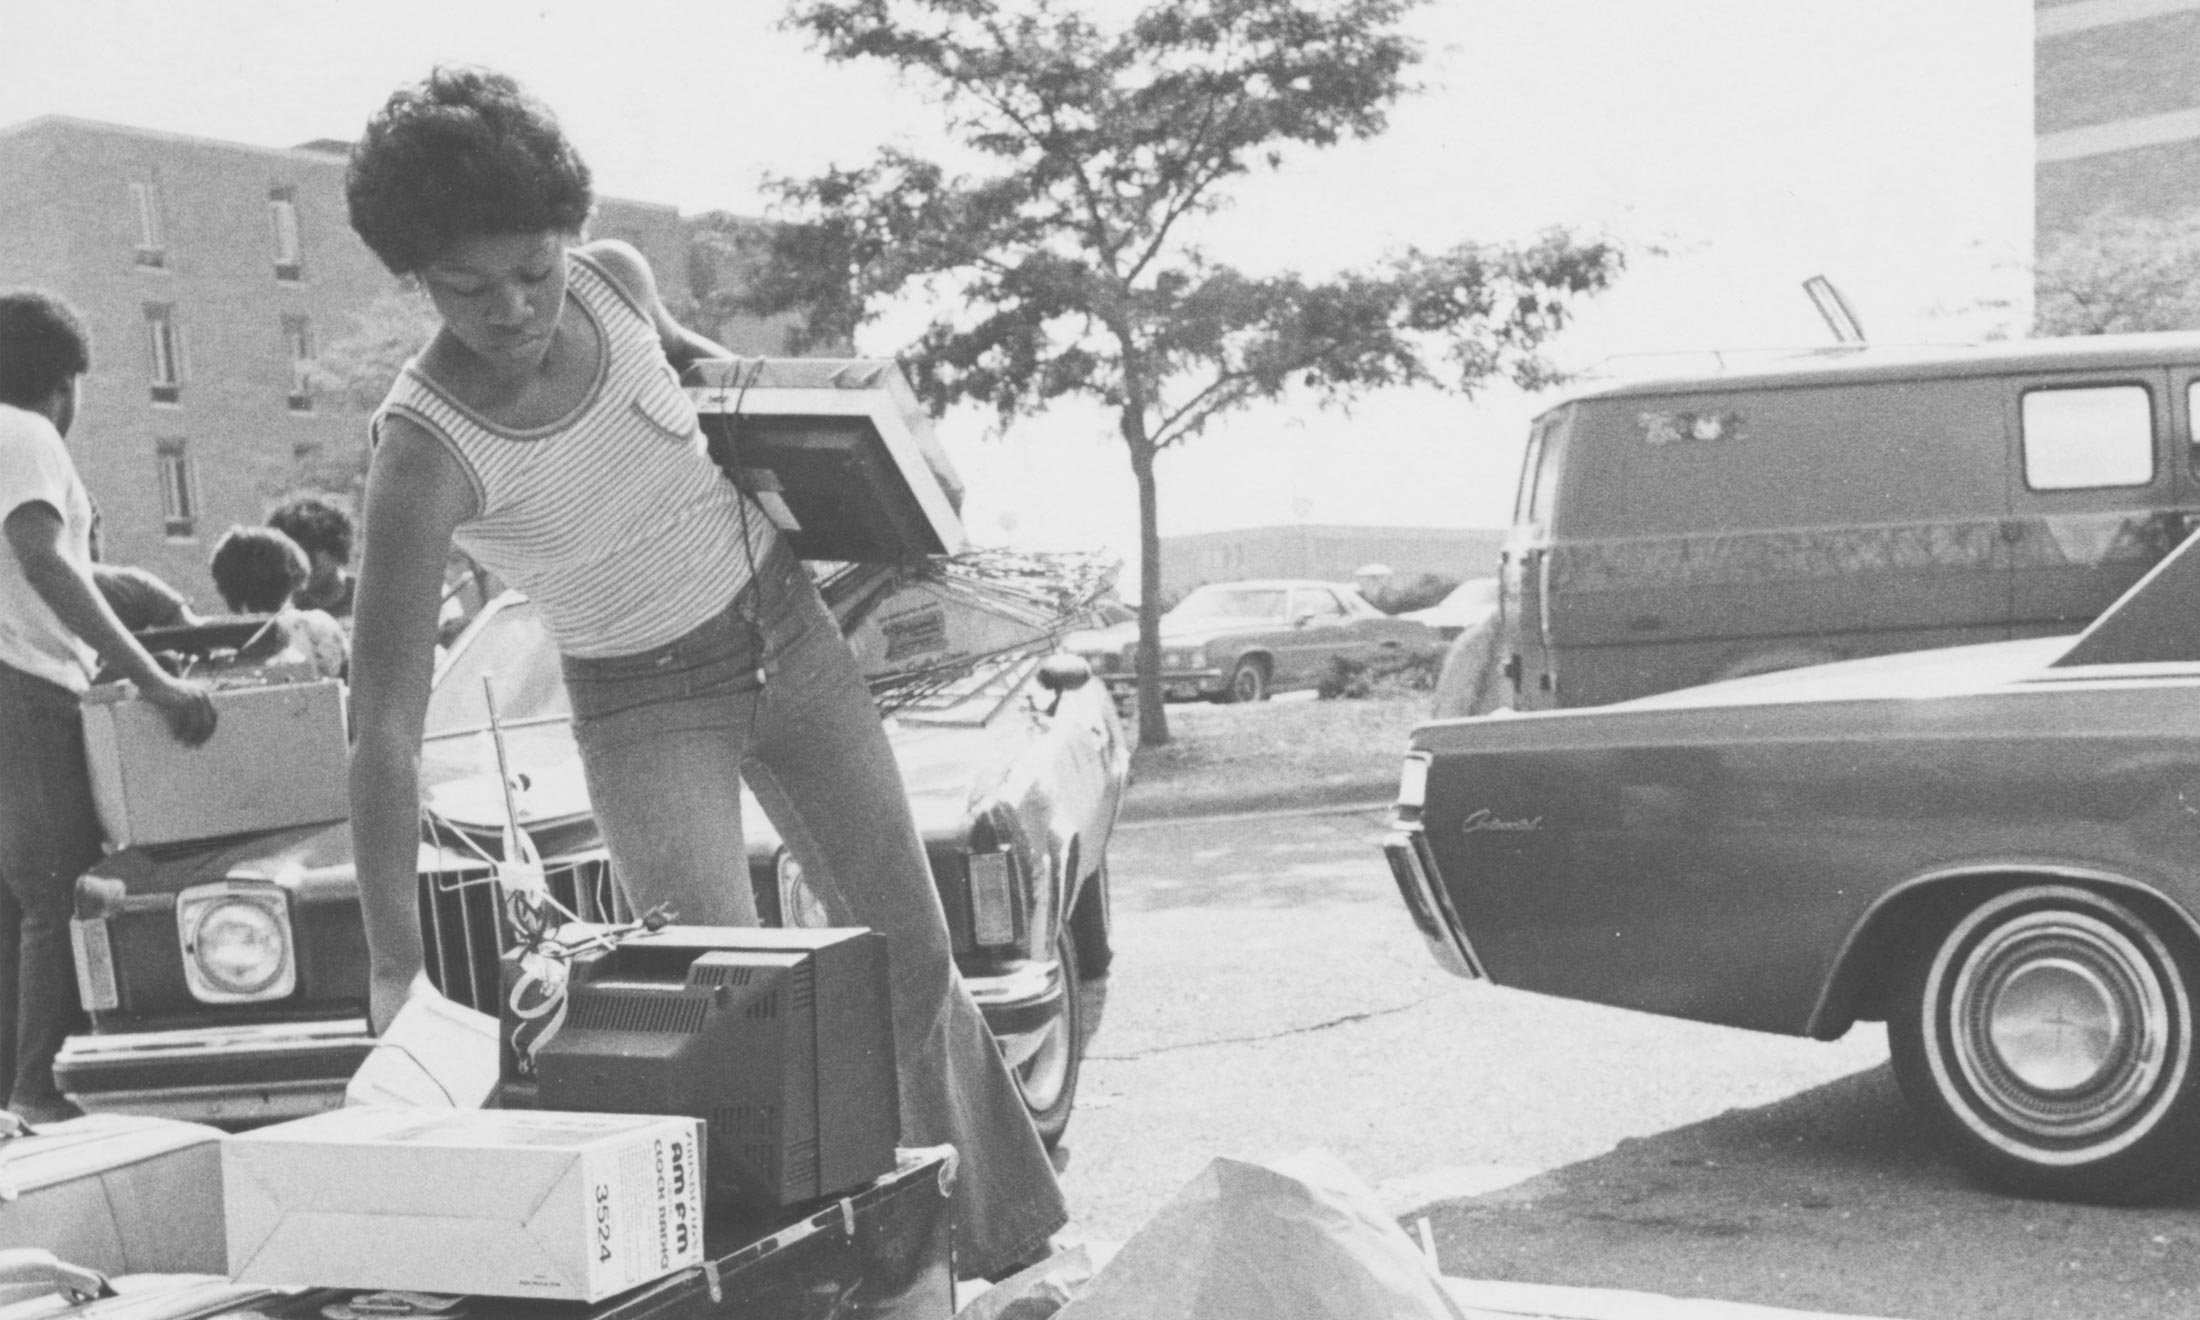 A black and white photo of an African-American Oakland University student picking up electronics from the curbside in front of an old styled car